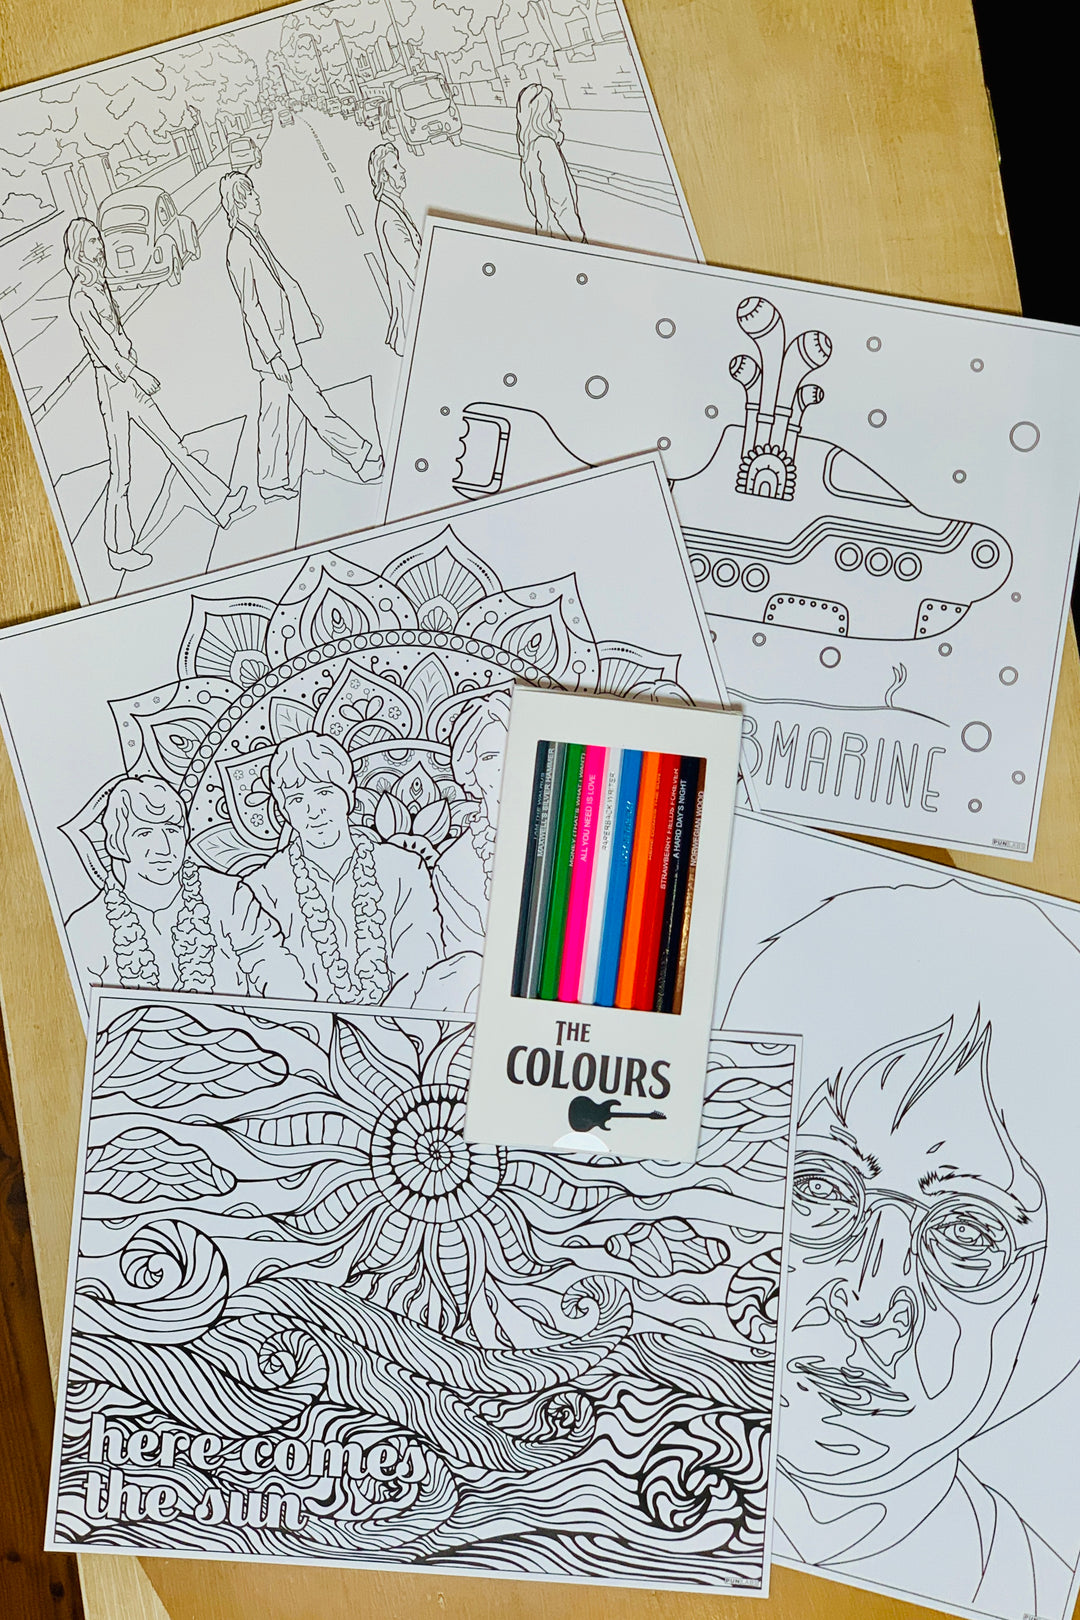 The Beatles Inspired Colored Pencils & Coloring Pages Gift Bundle